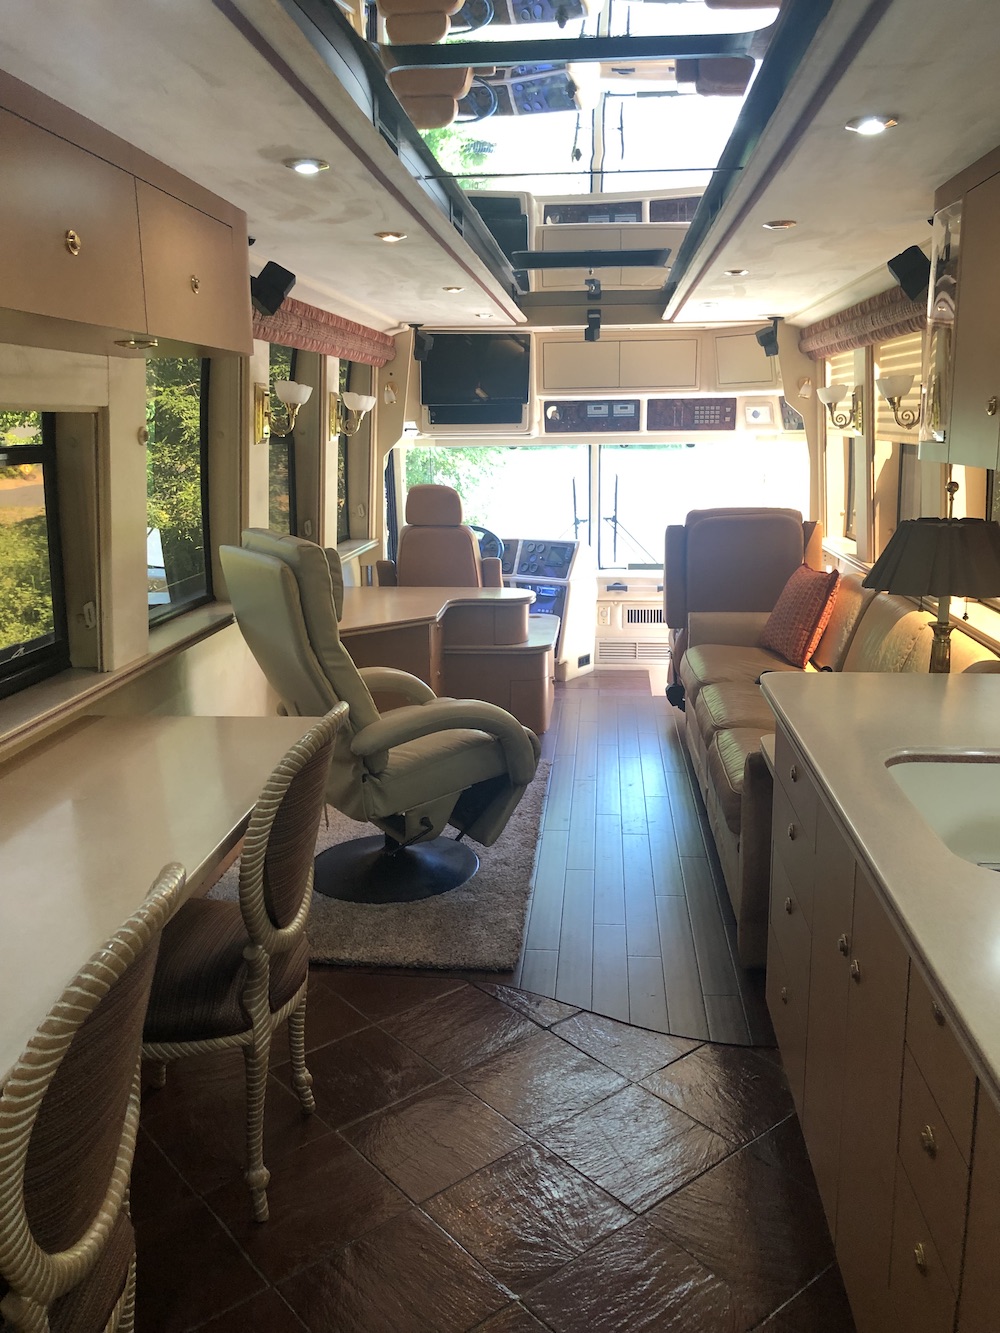 1999 Prevost Country Coach XLFor Sale